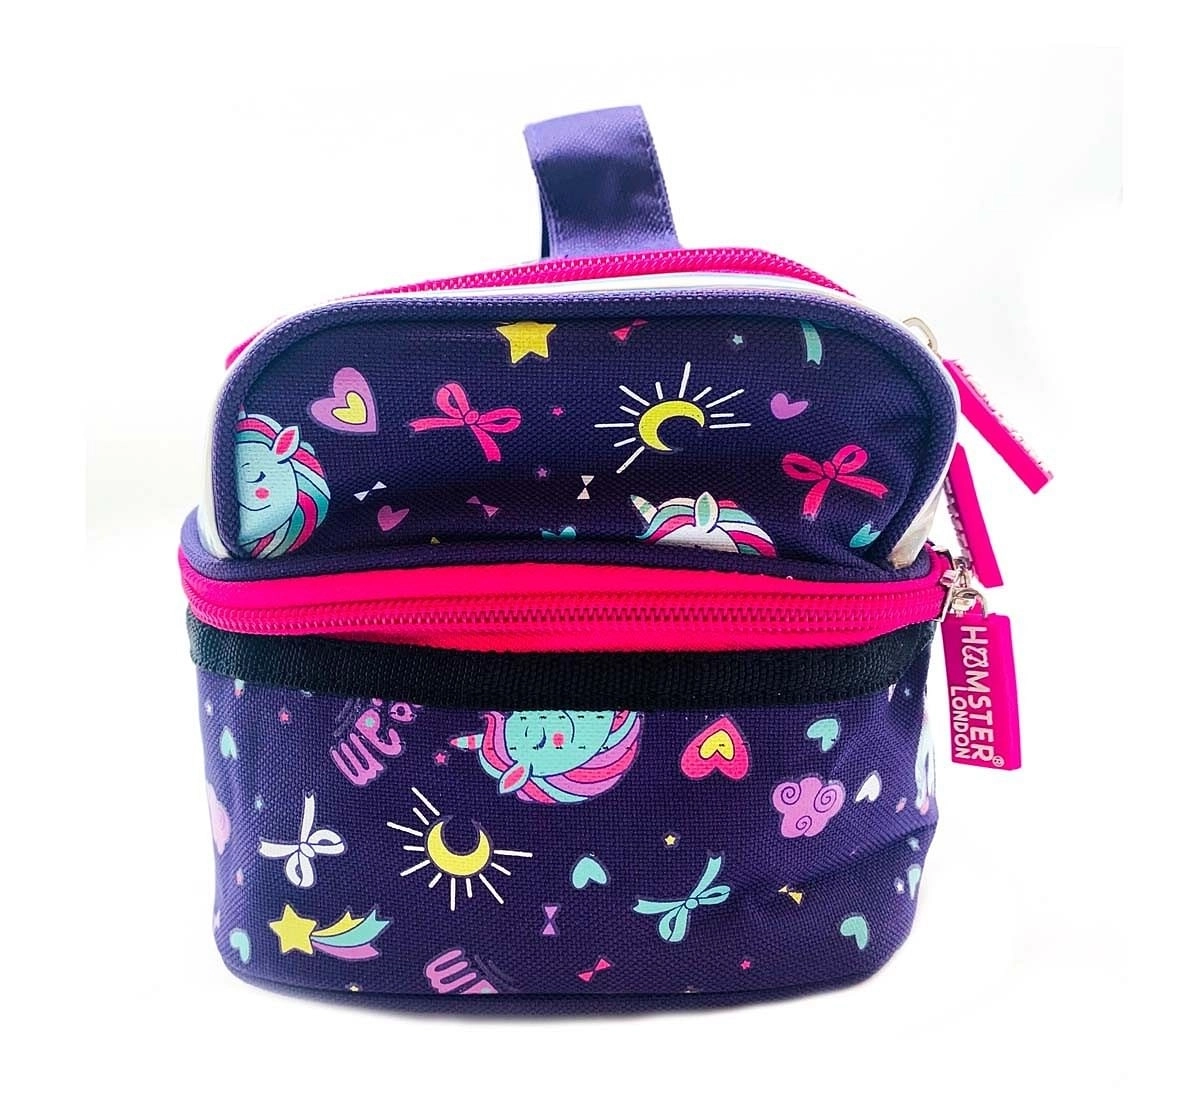 Hamster London Straight Fire Lunch Bag Unicorn Bags for Age 3Y+ (Purple)